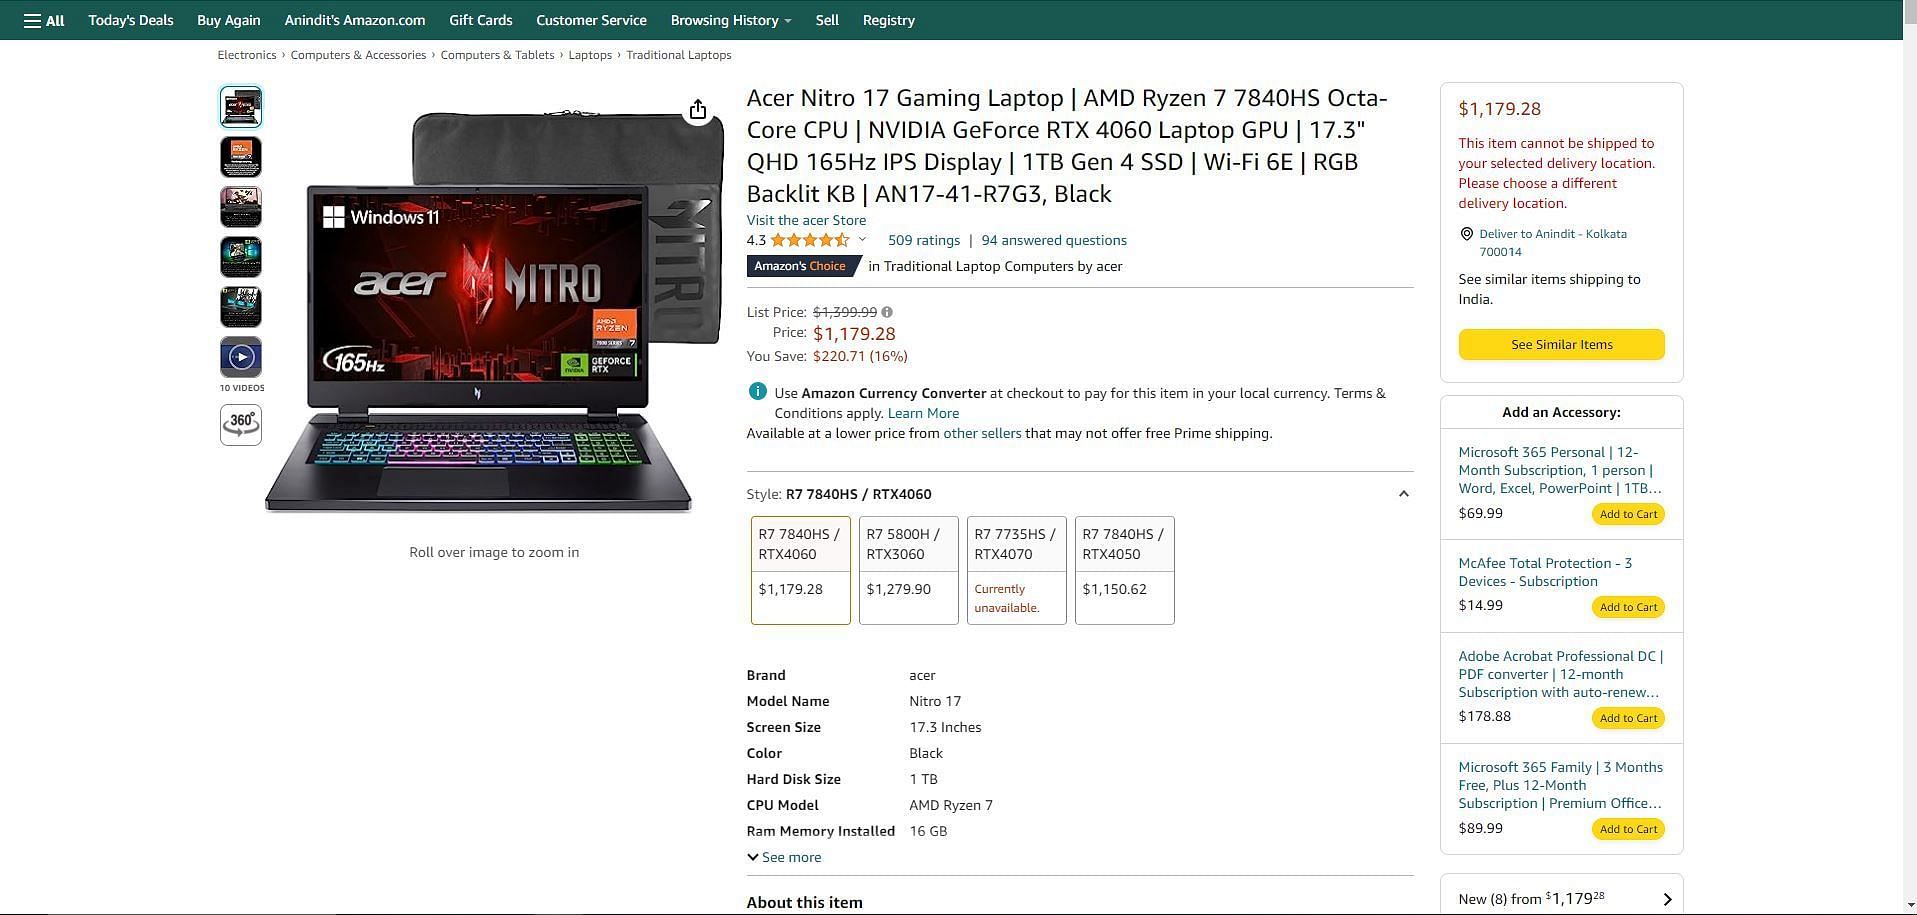 A great gaming laptop that you can purchase during this Holiday Sale (Image via Amazon)